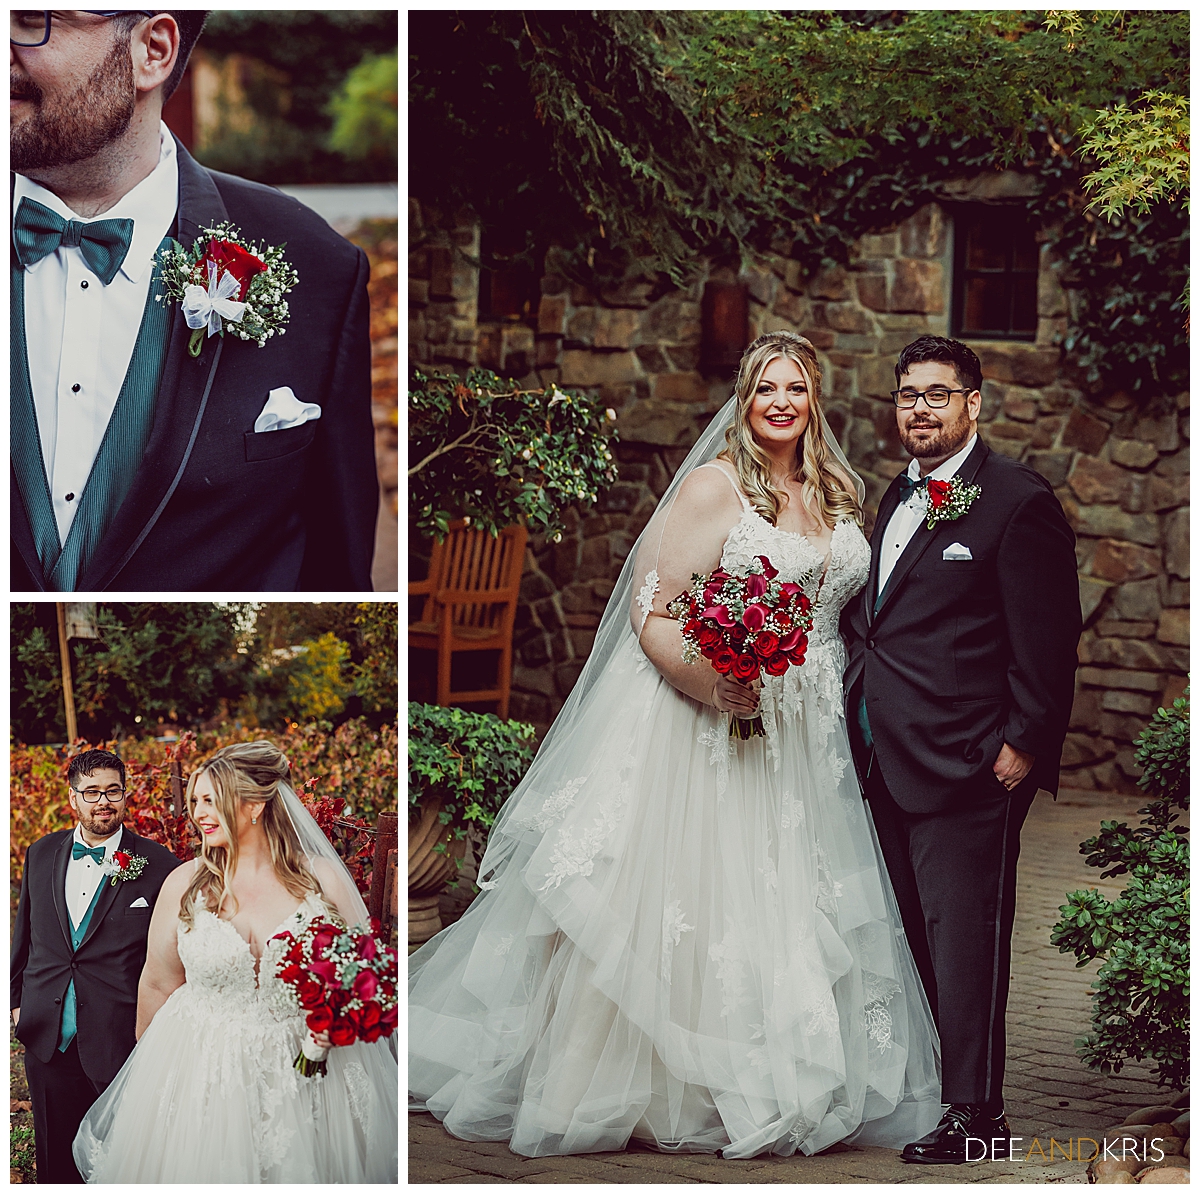 Three images: Top left image of groom's boutonniere. Bottom left image of groom standing behind bride looking at her and bride looking off to left. Right image of bride and groom standing together in garden looking at camera.